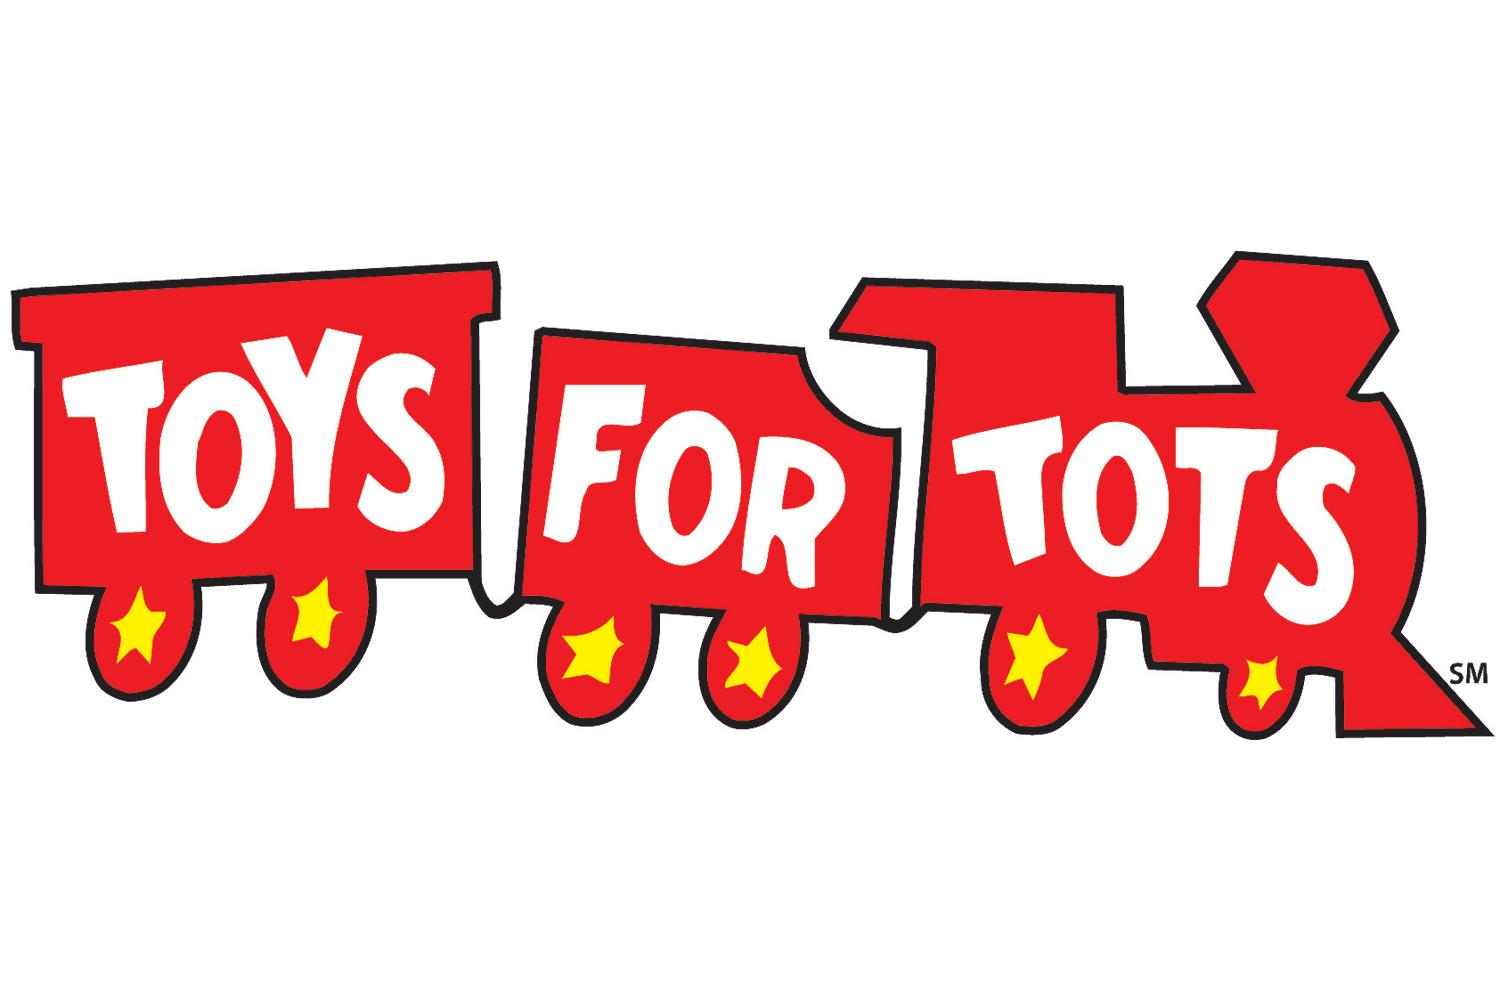 Toys for Tots logo.